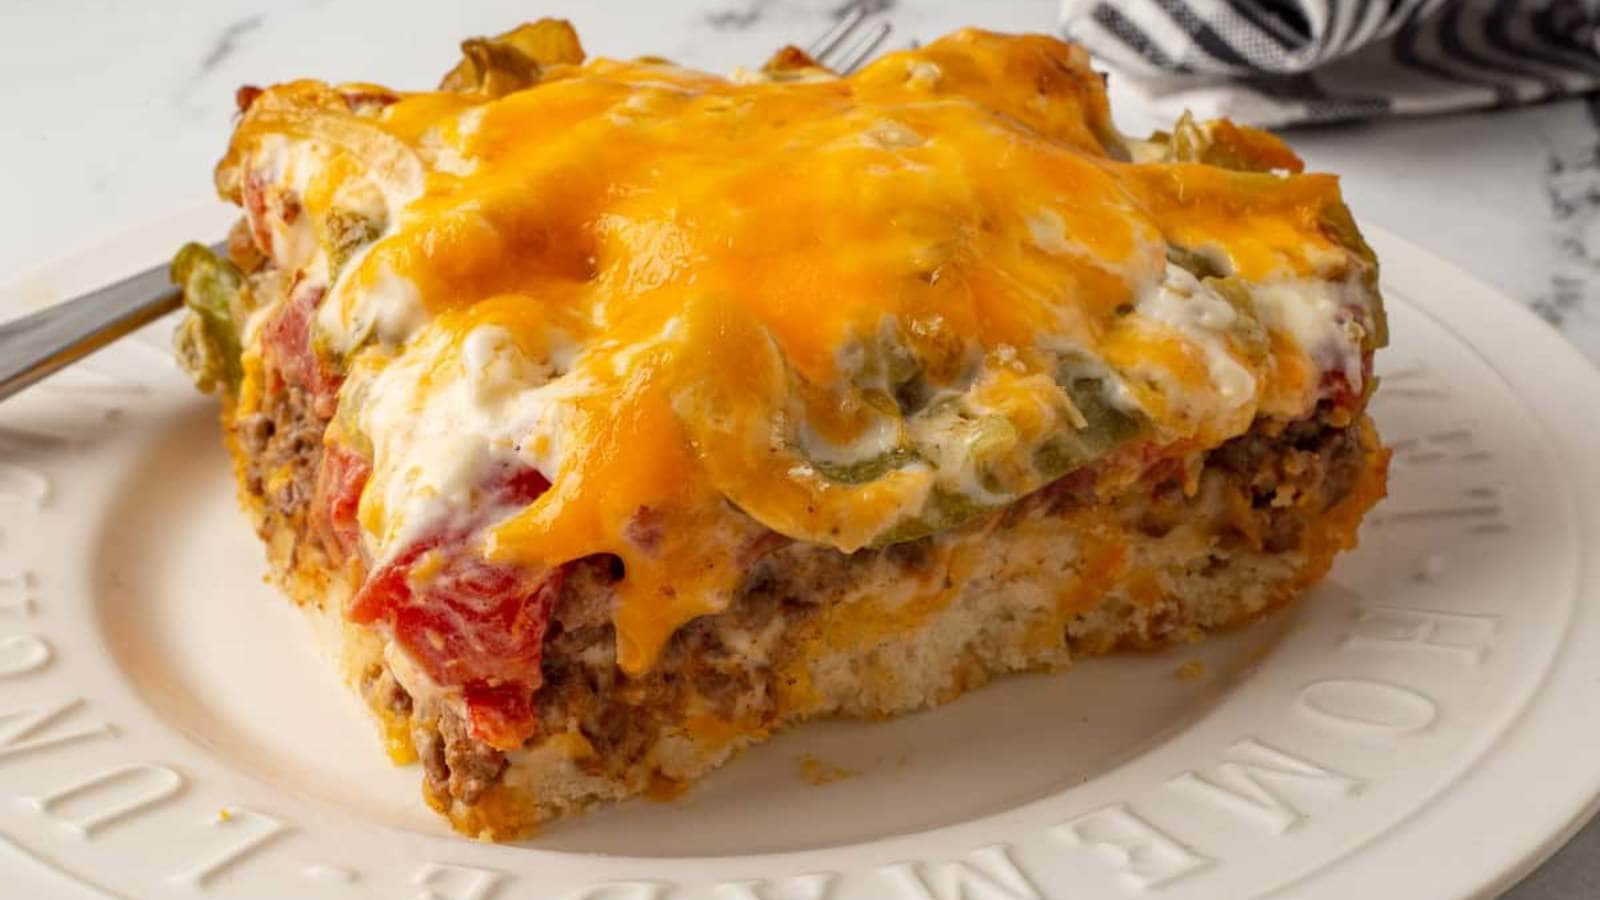 <p>This easy casserole recipe is filled with layers of ground beef with taco seasoning, green peppers, onions, and a sour-cream-based cheesy sauce topped with cheddar cheese. The layers sit on top of a delicious biscuit crust. John Wayne Casserole is a sensational recipe and exactly what you need for a busy weeknight dinner.</p><p><strong>Get the Recipe: <a href="https://shesnotcookin.com/john-wayne-casserole-with-bisquick" rel="noreferrer noopener">John Wayne Casserole</a></strong></p>